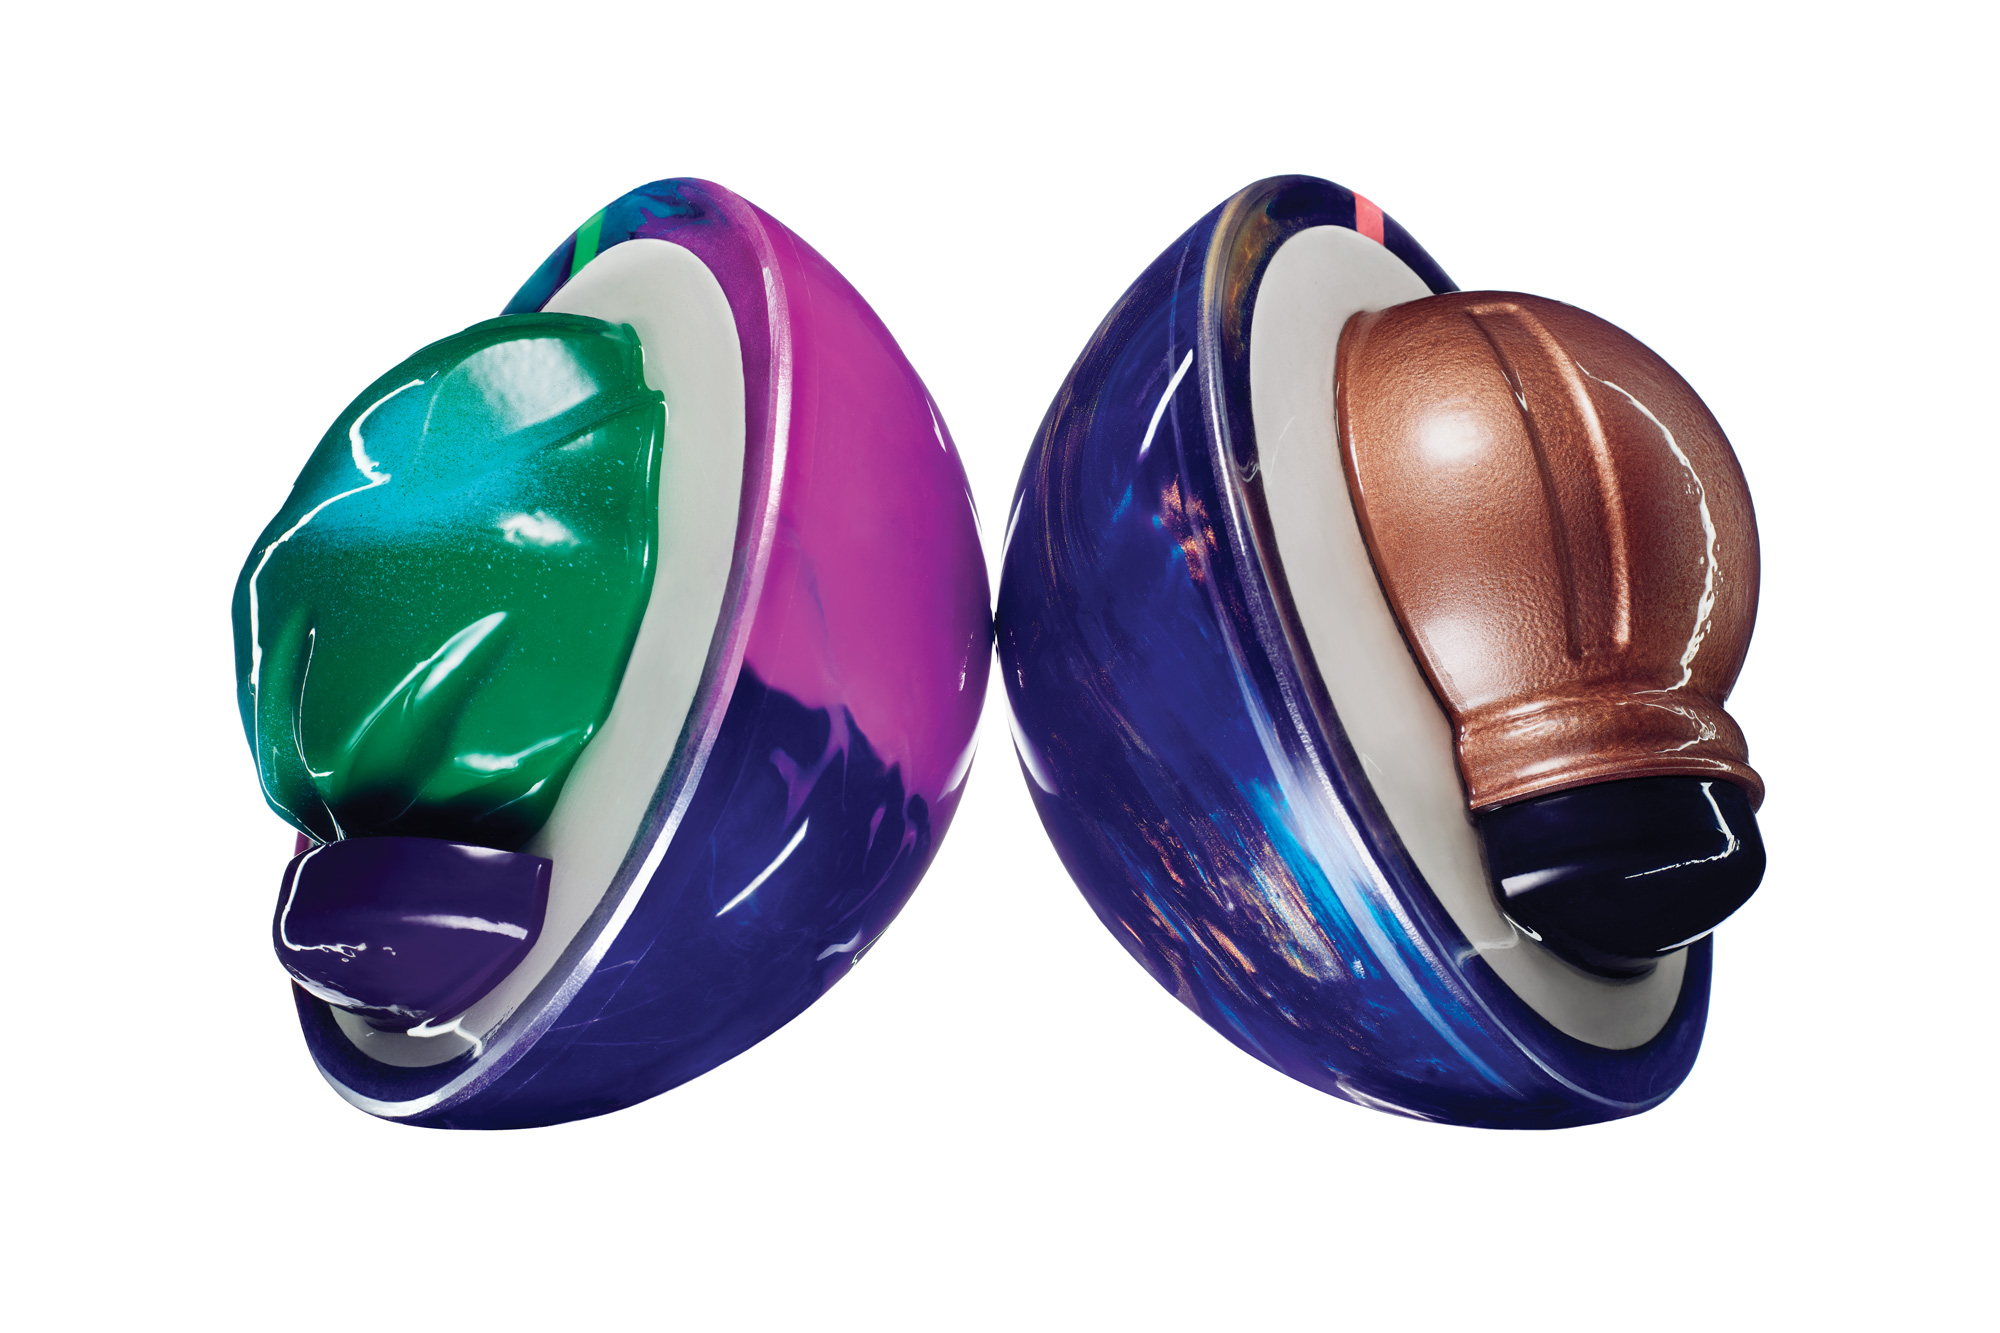 The insides of pro bowling balls will make your head spin